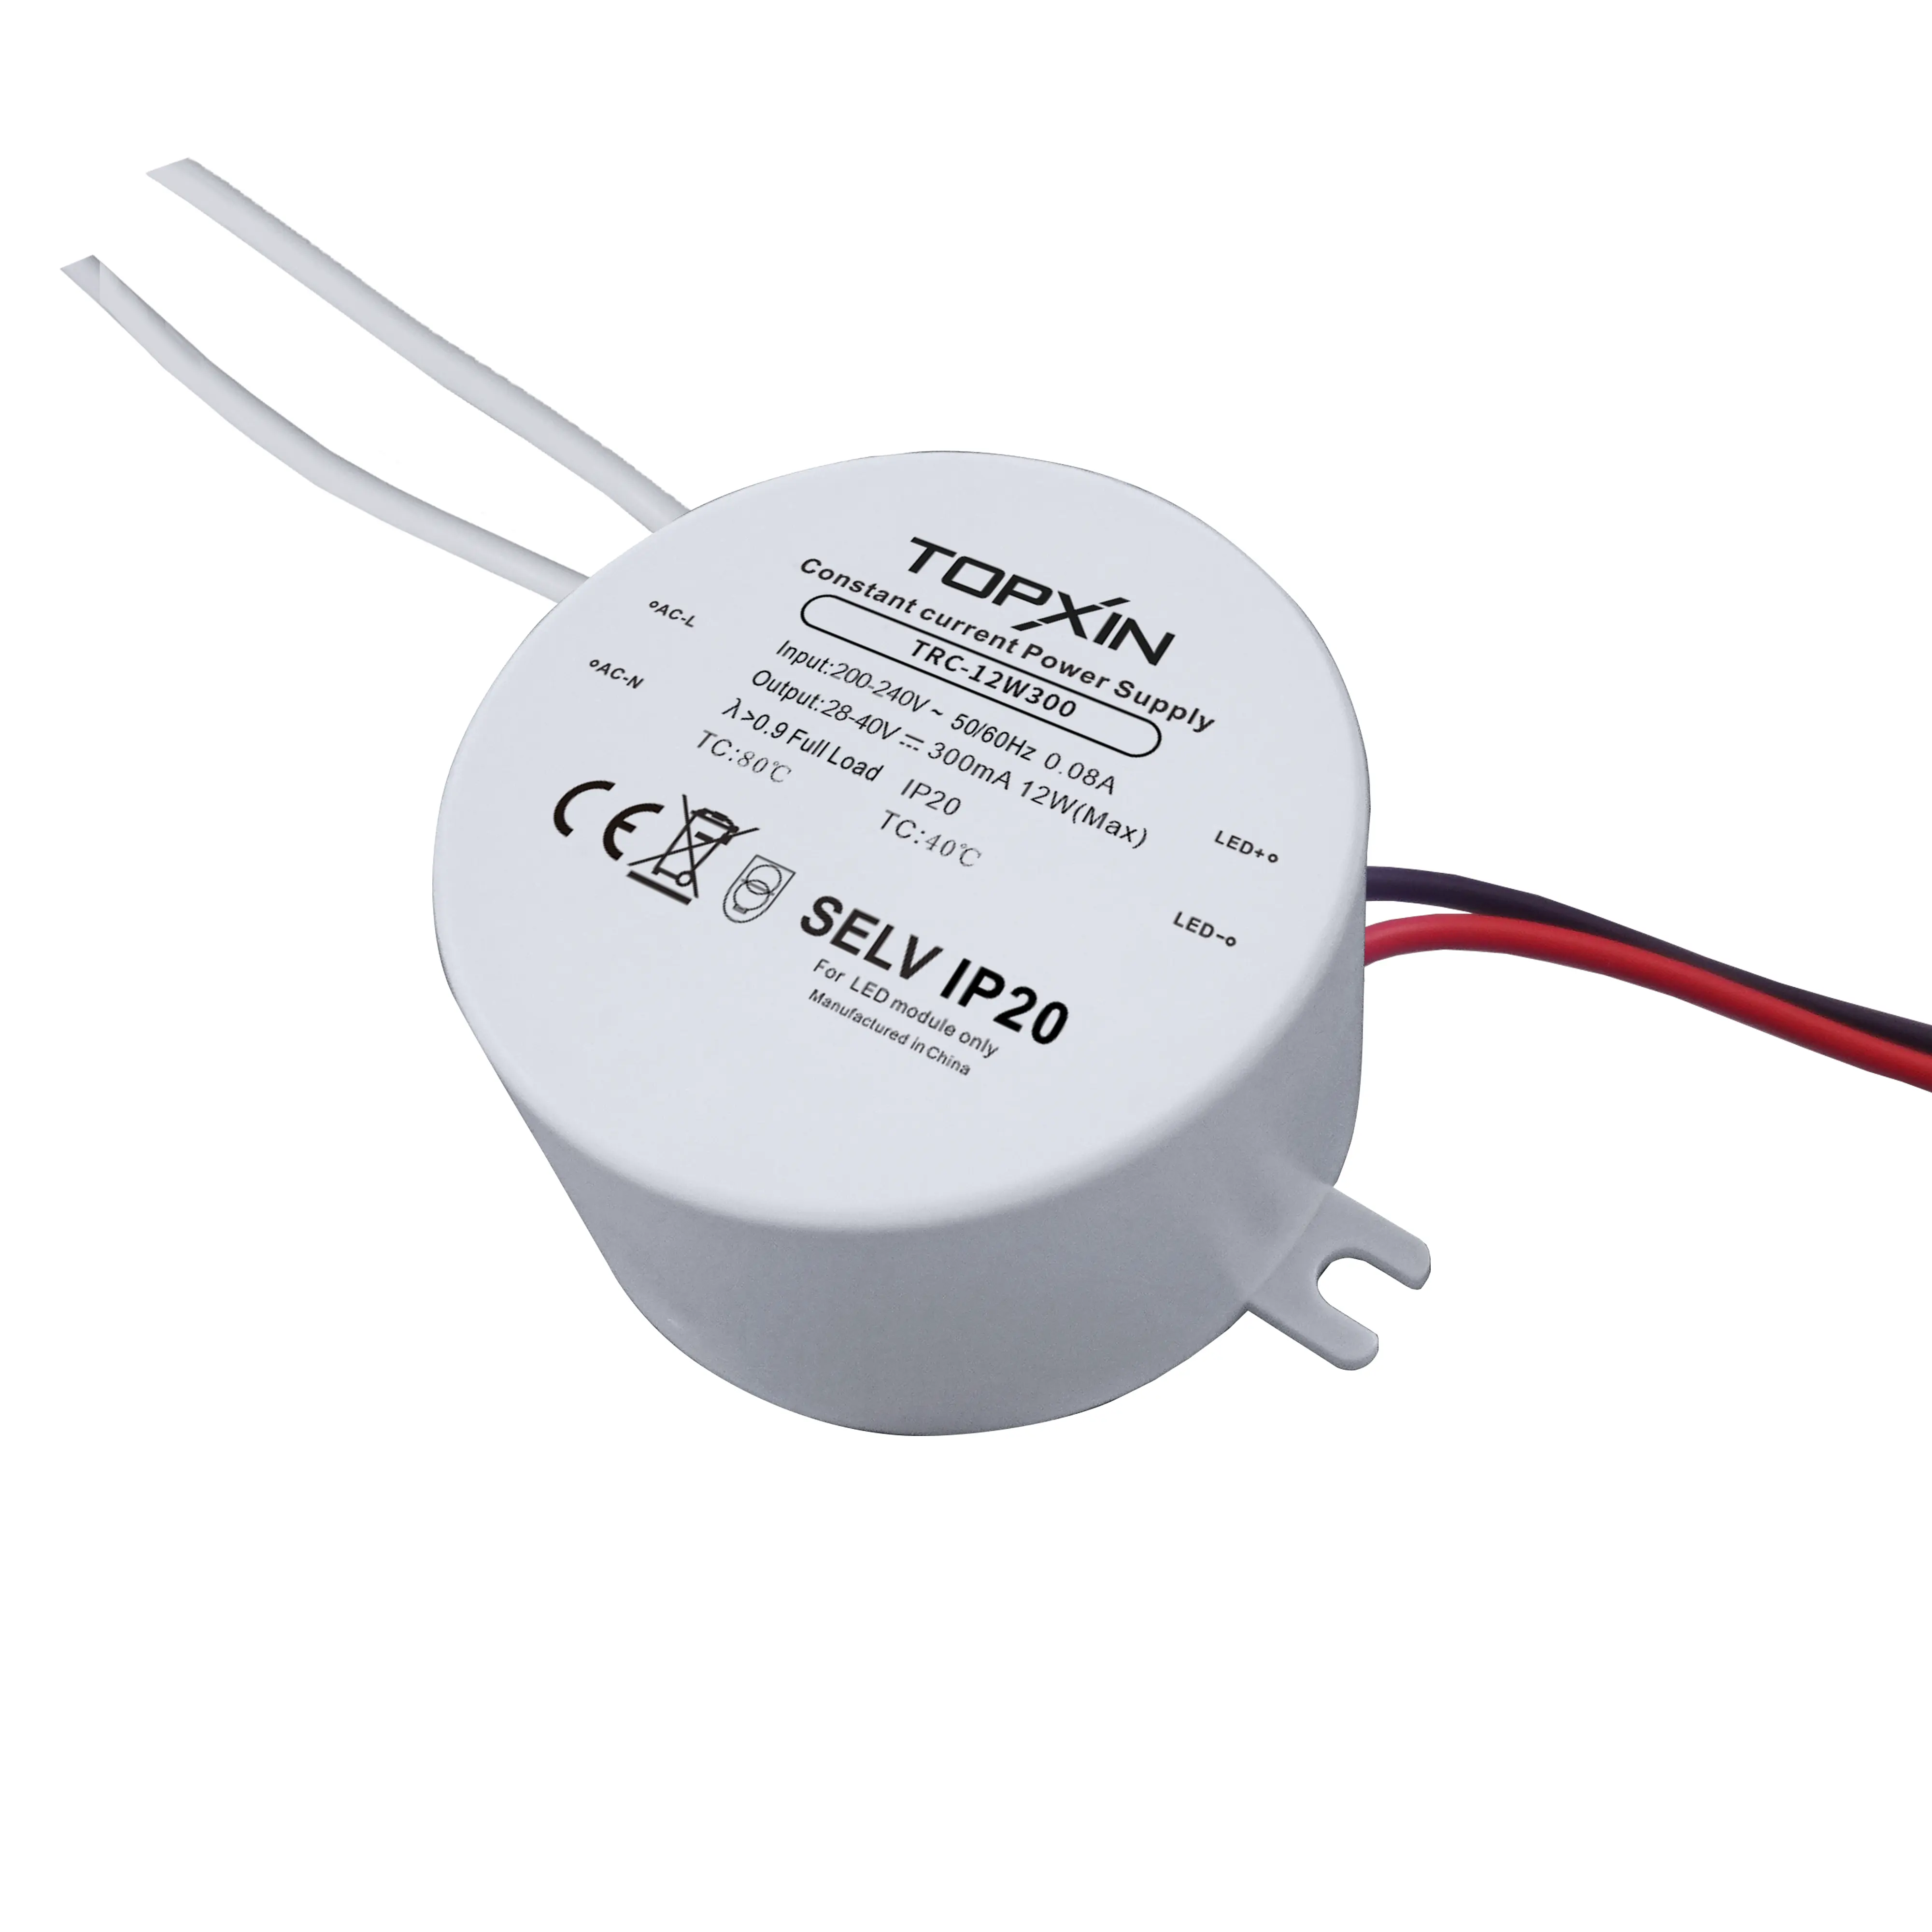 12W 28-40VDC 300ma Constant Current LED Driver Switching Power Supply No Flicker High PF Round Shape AC to DC for panel light